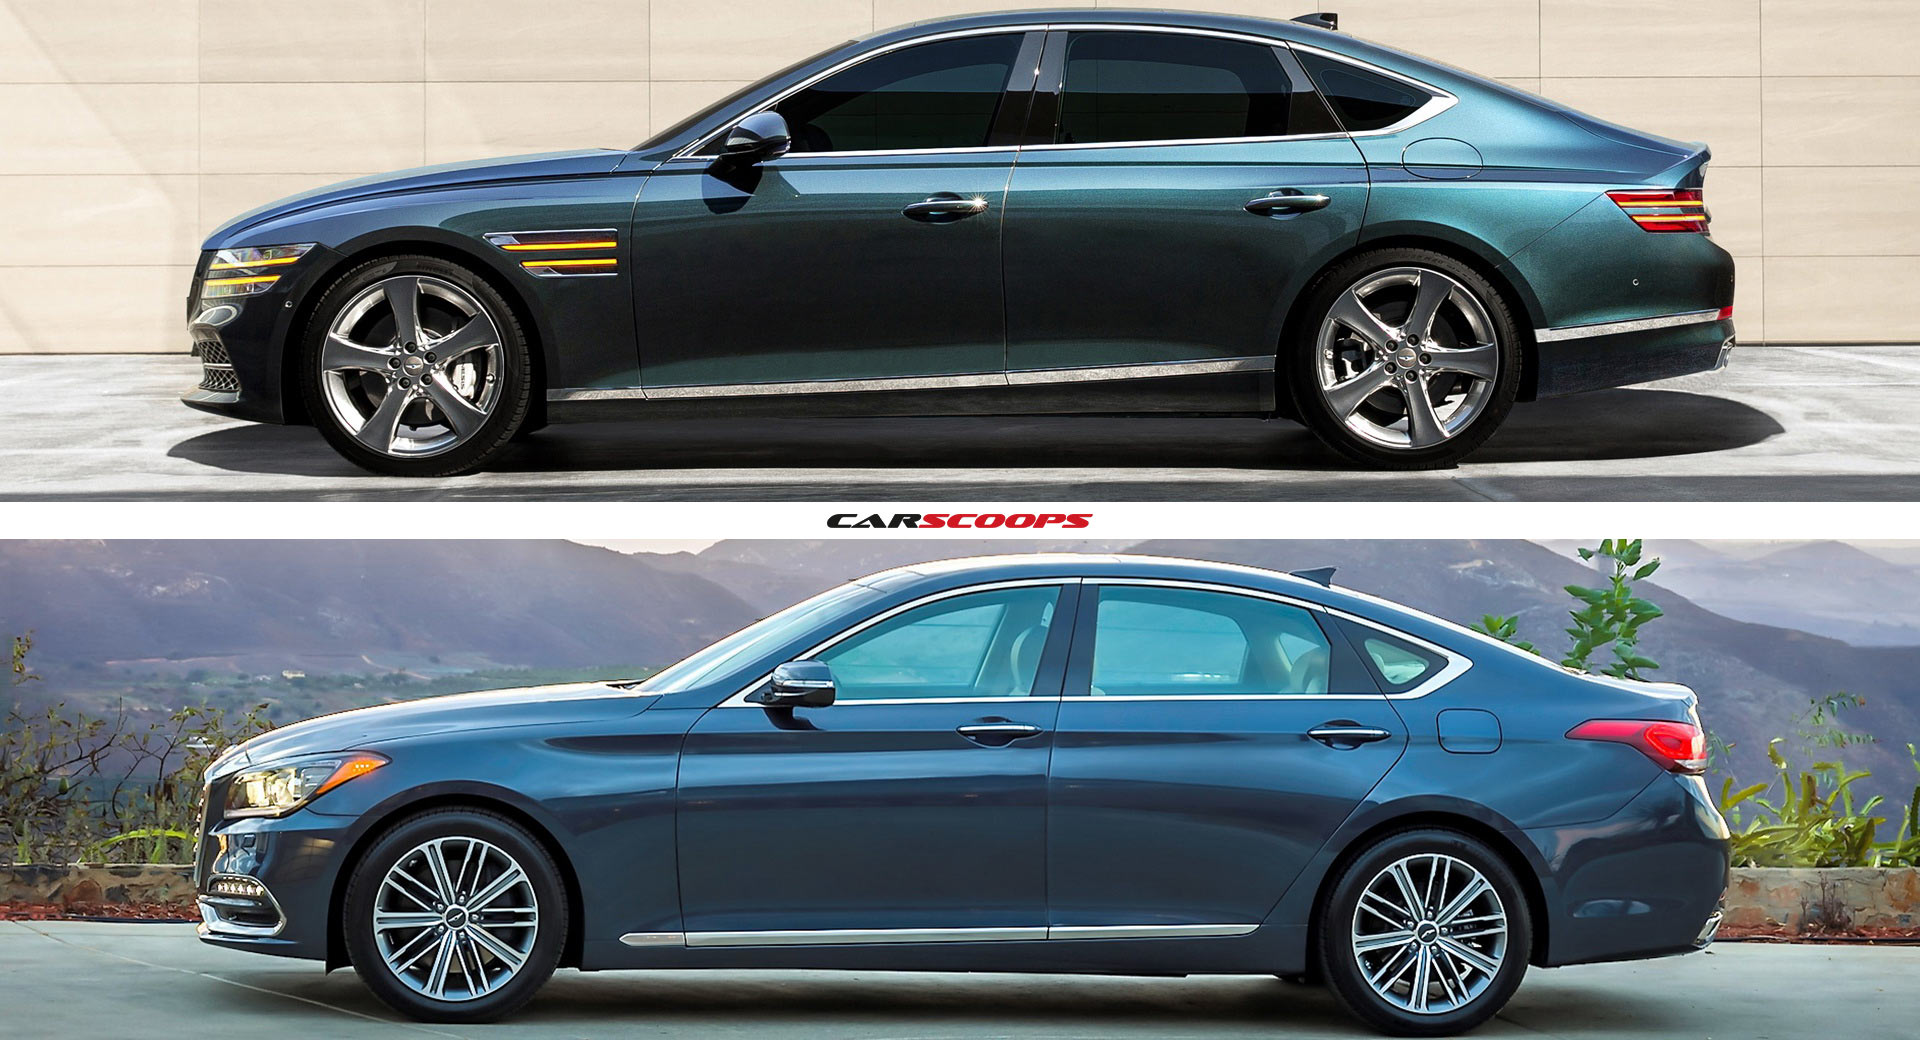 How Does The 2021 Genesis G80 Compare To Its Predecessor? | Carscoops